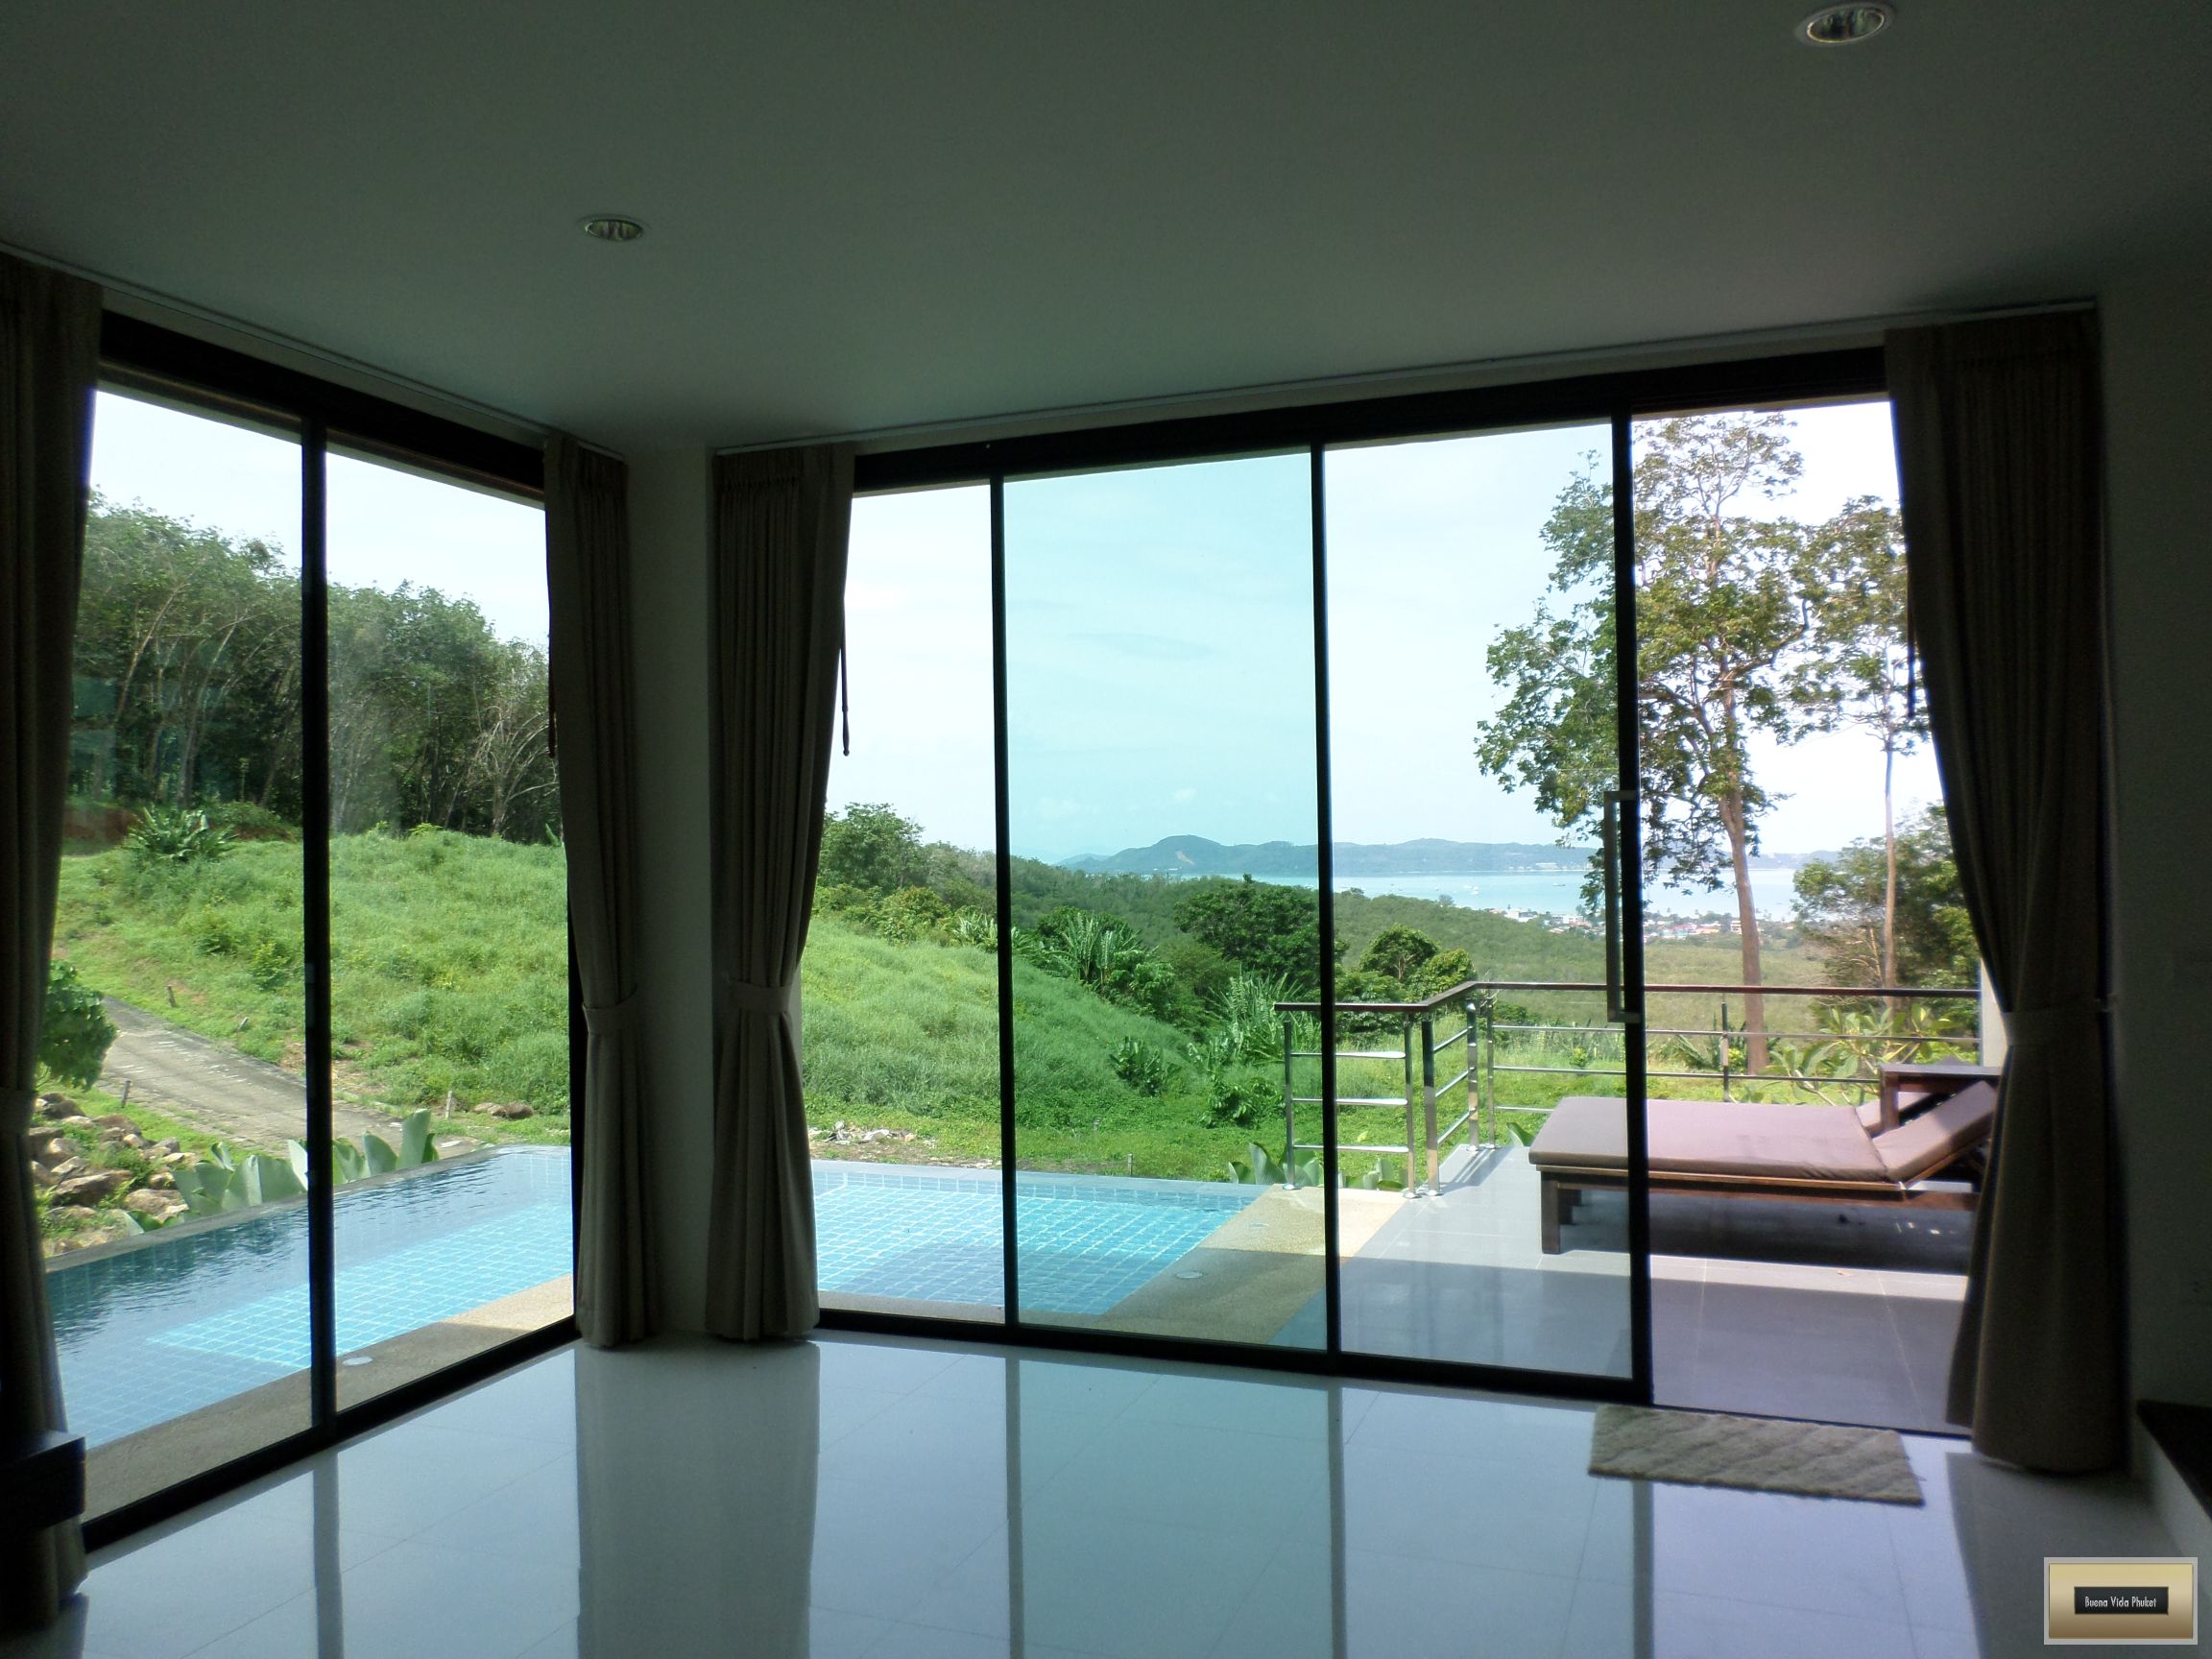 2 bedroom villa with seaview in Nai harn